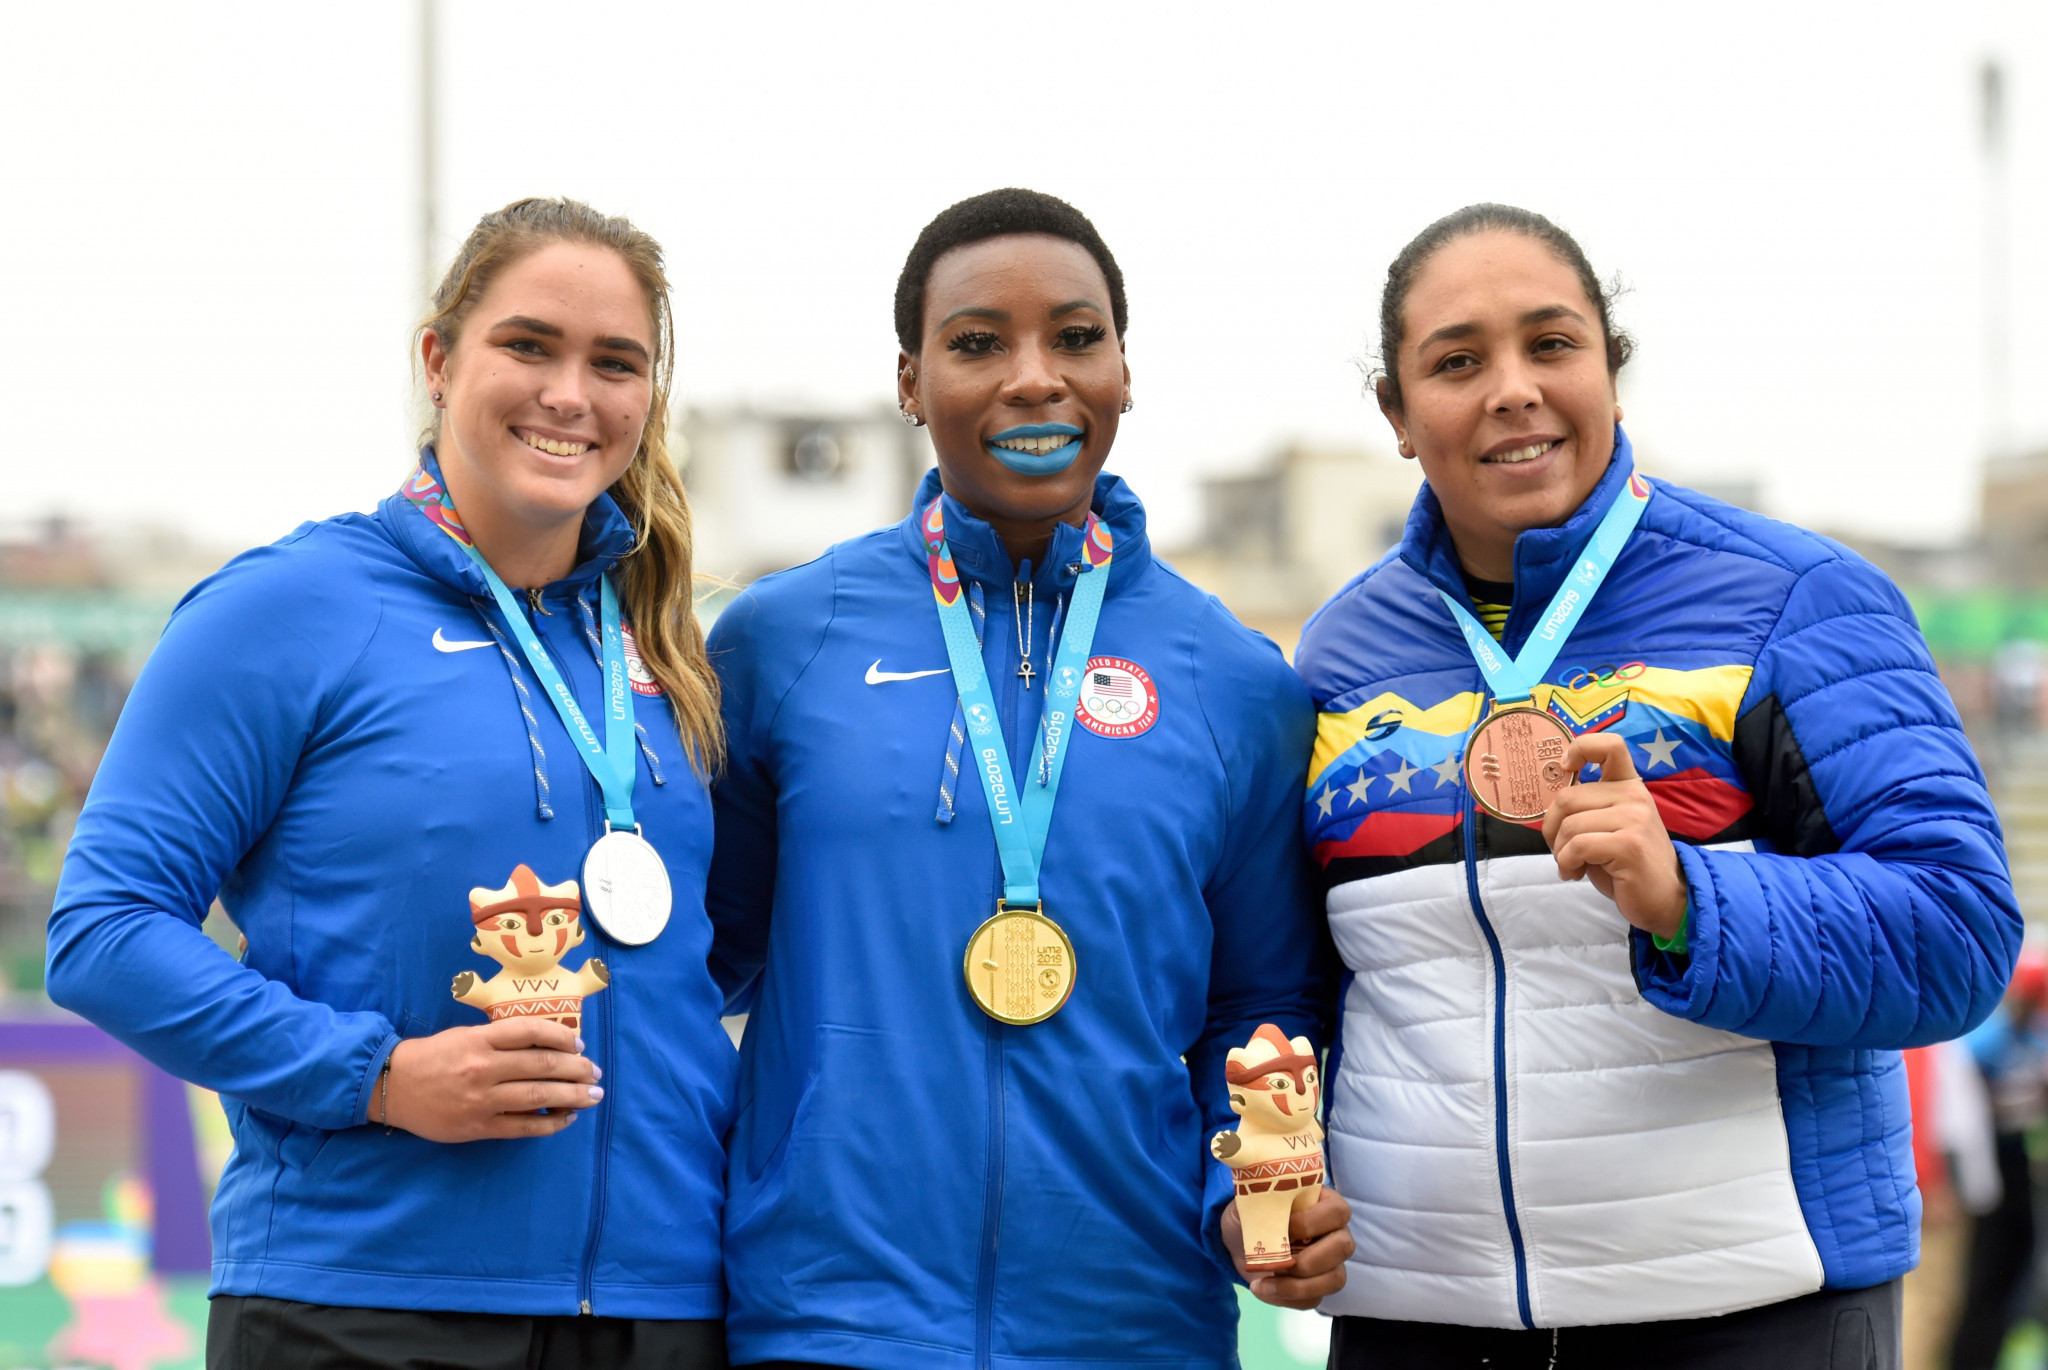 Gwendolyn Berry, centre, won hammer throw gold at the Lima 2019 Pan American Games ©Getty Images